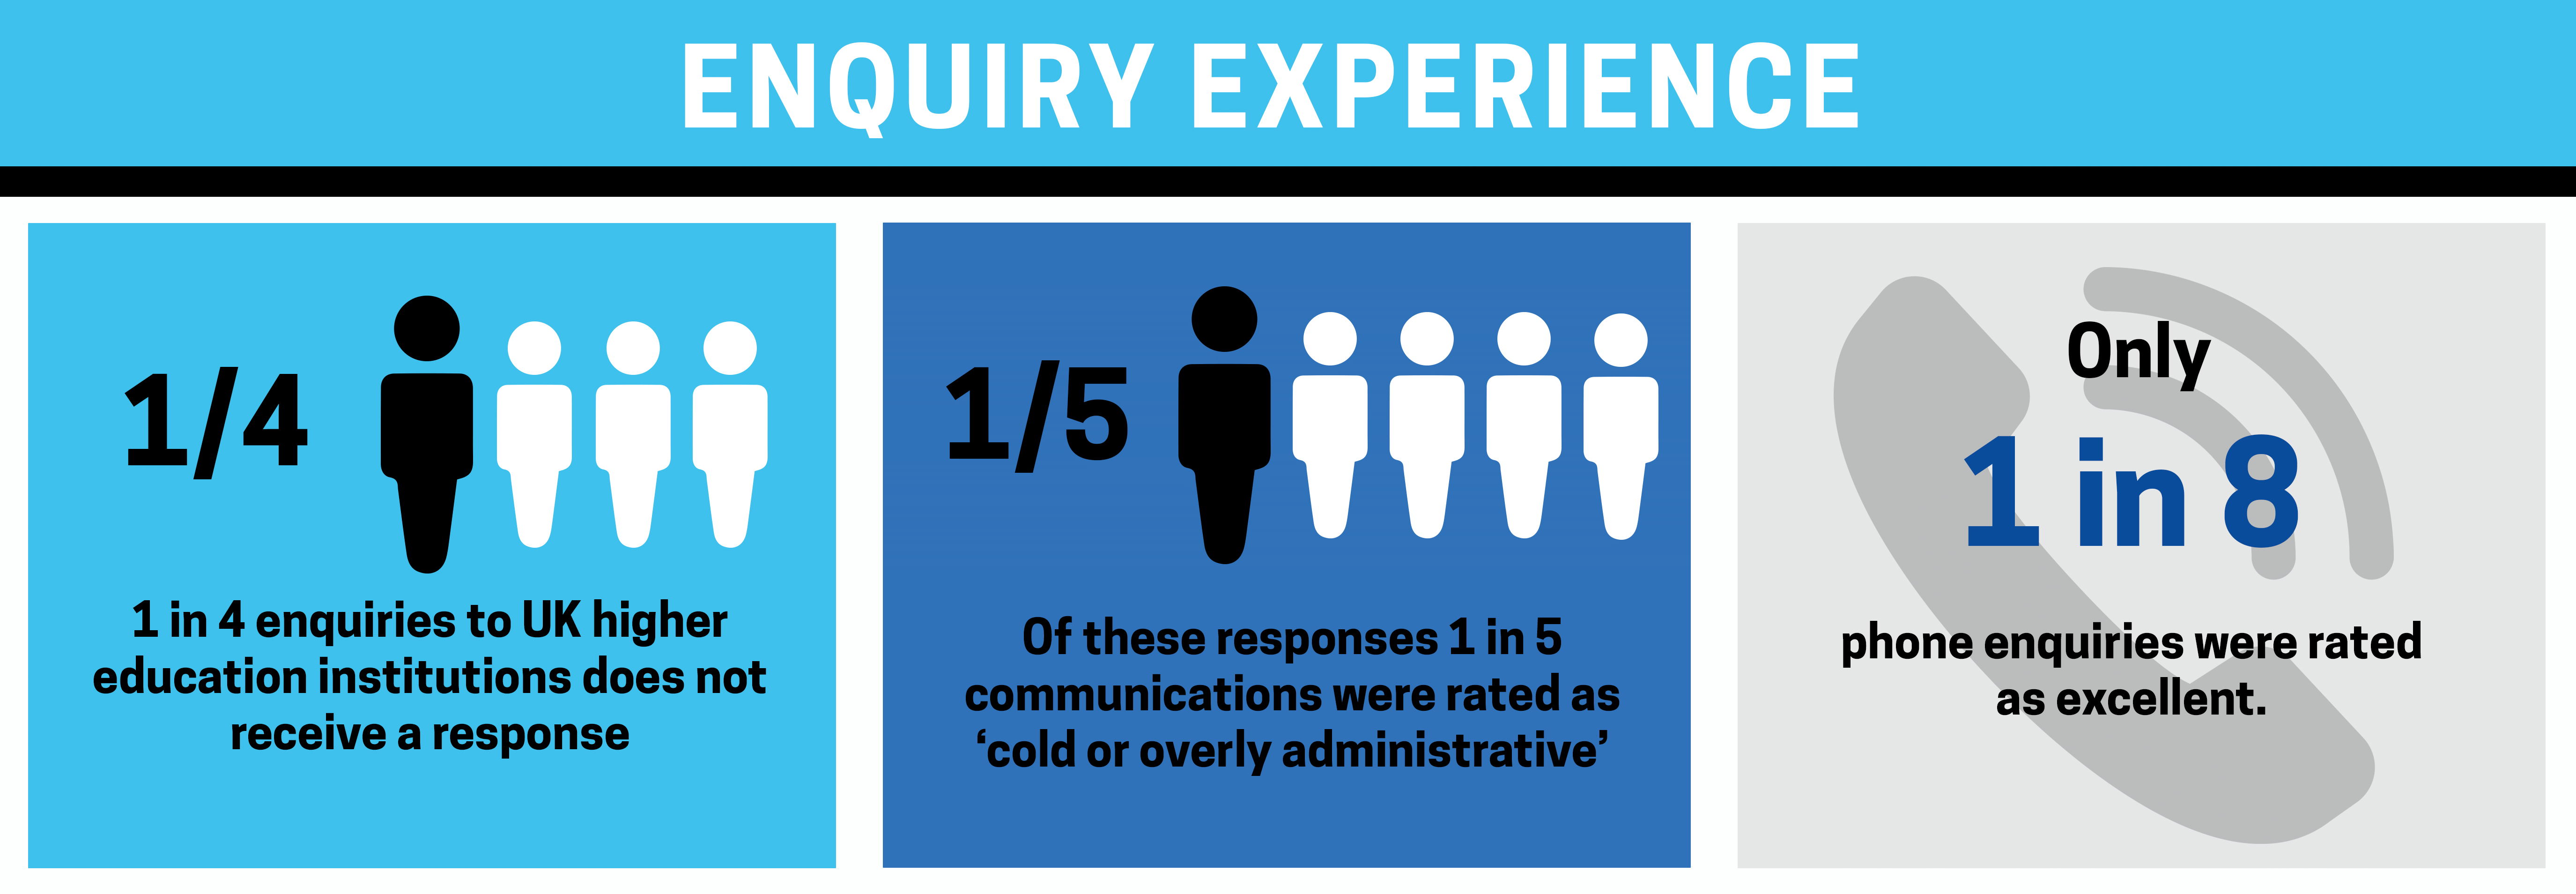 enquiry expereince infographic